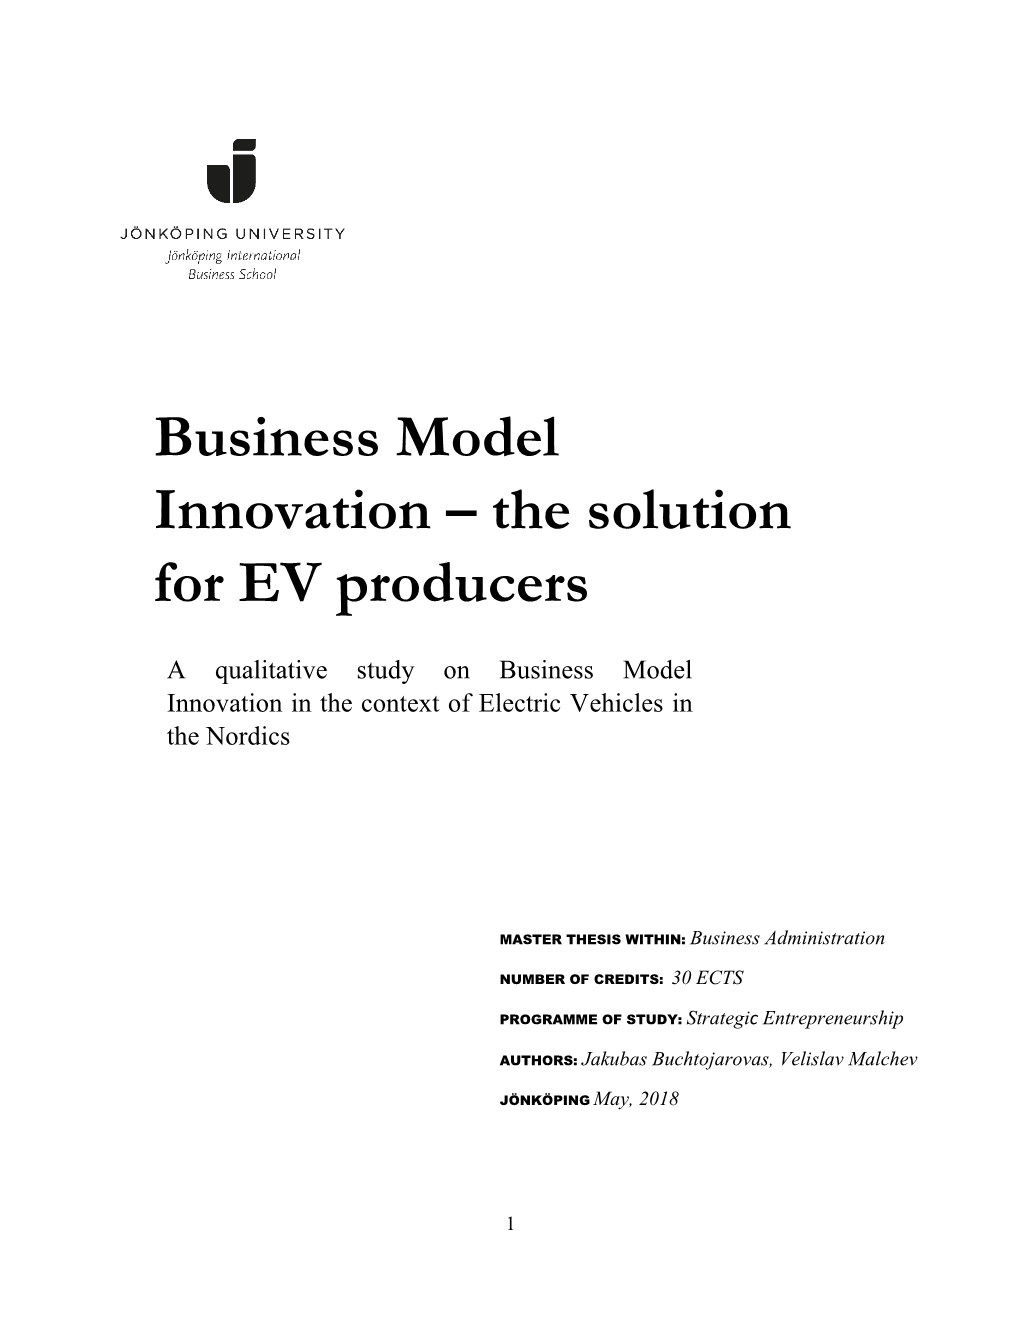 Business Model Innovation – the Solution for EV Producers